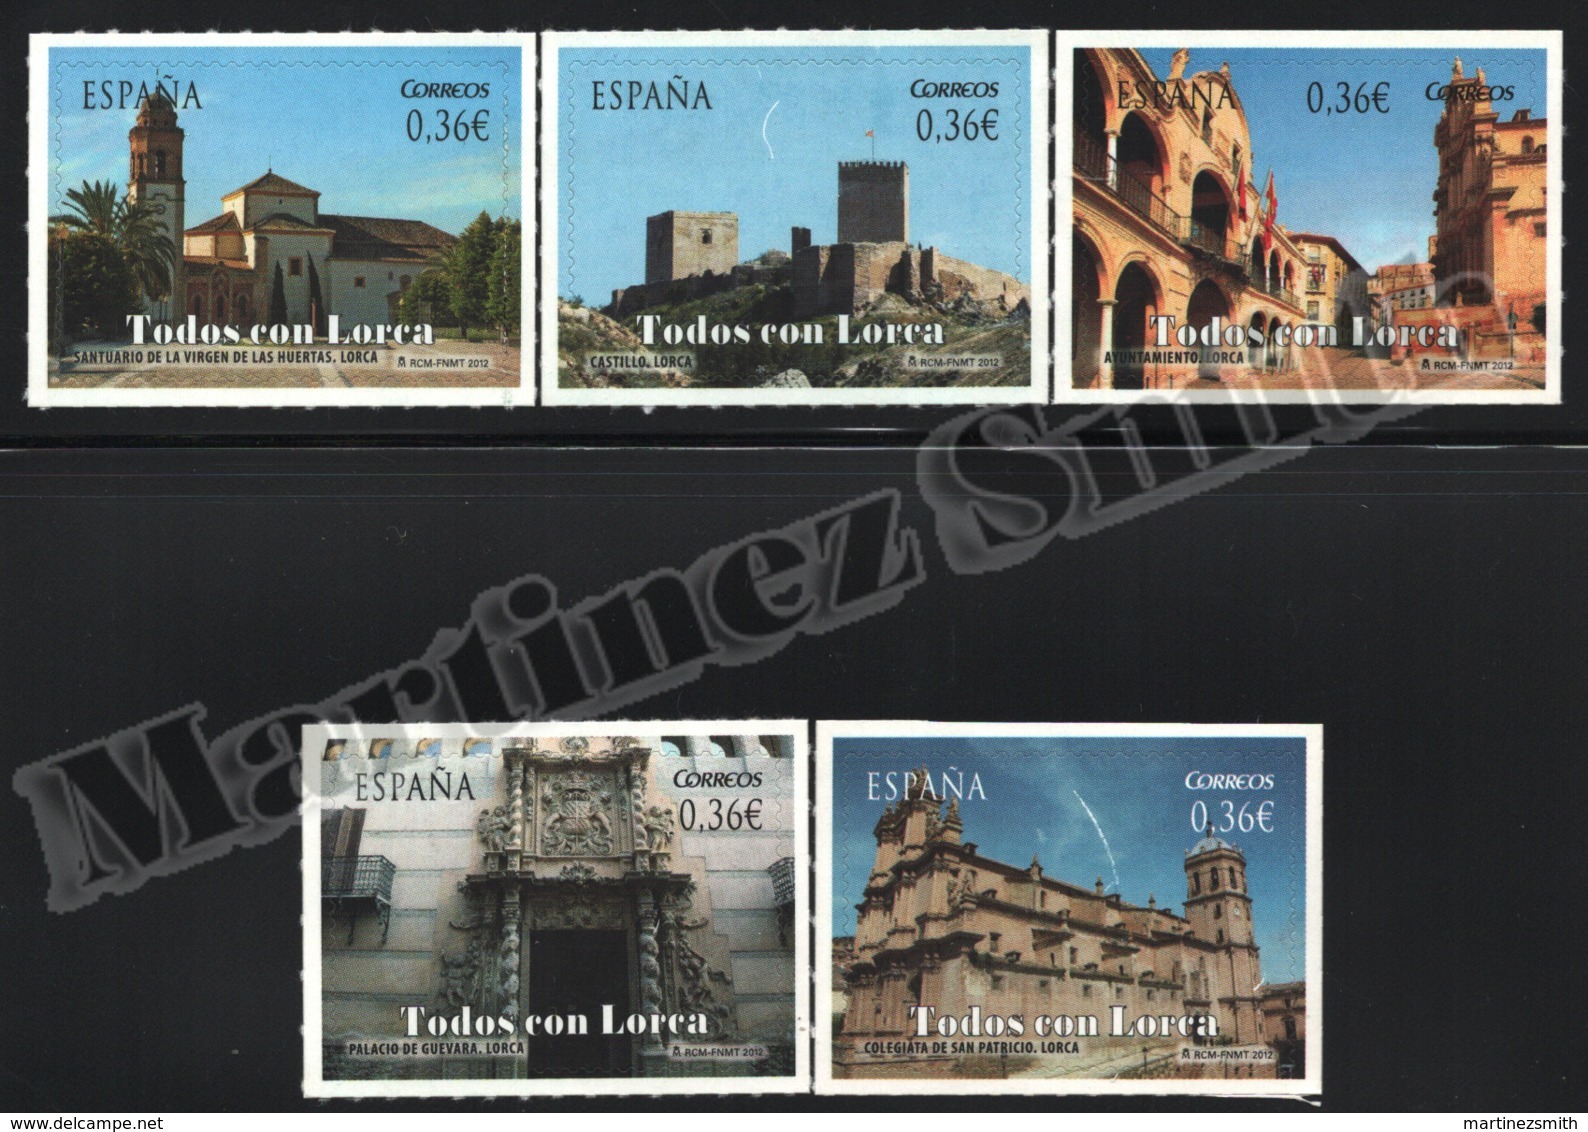 Spain - Espagne 2012 Yvert 4368-72, Everyone With Lorca - Architecture - MNH - Nuevos